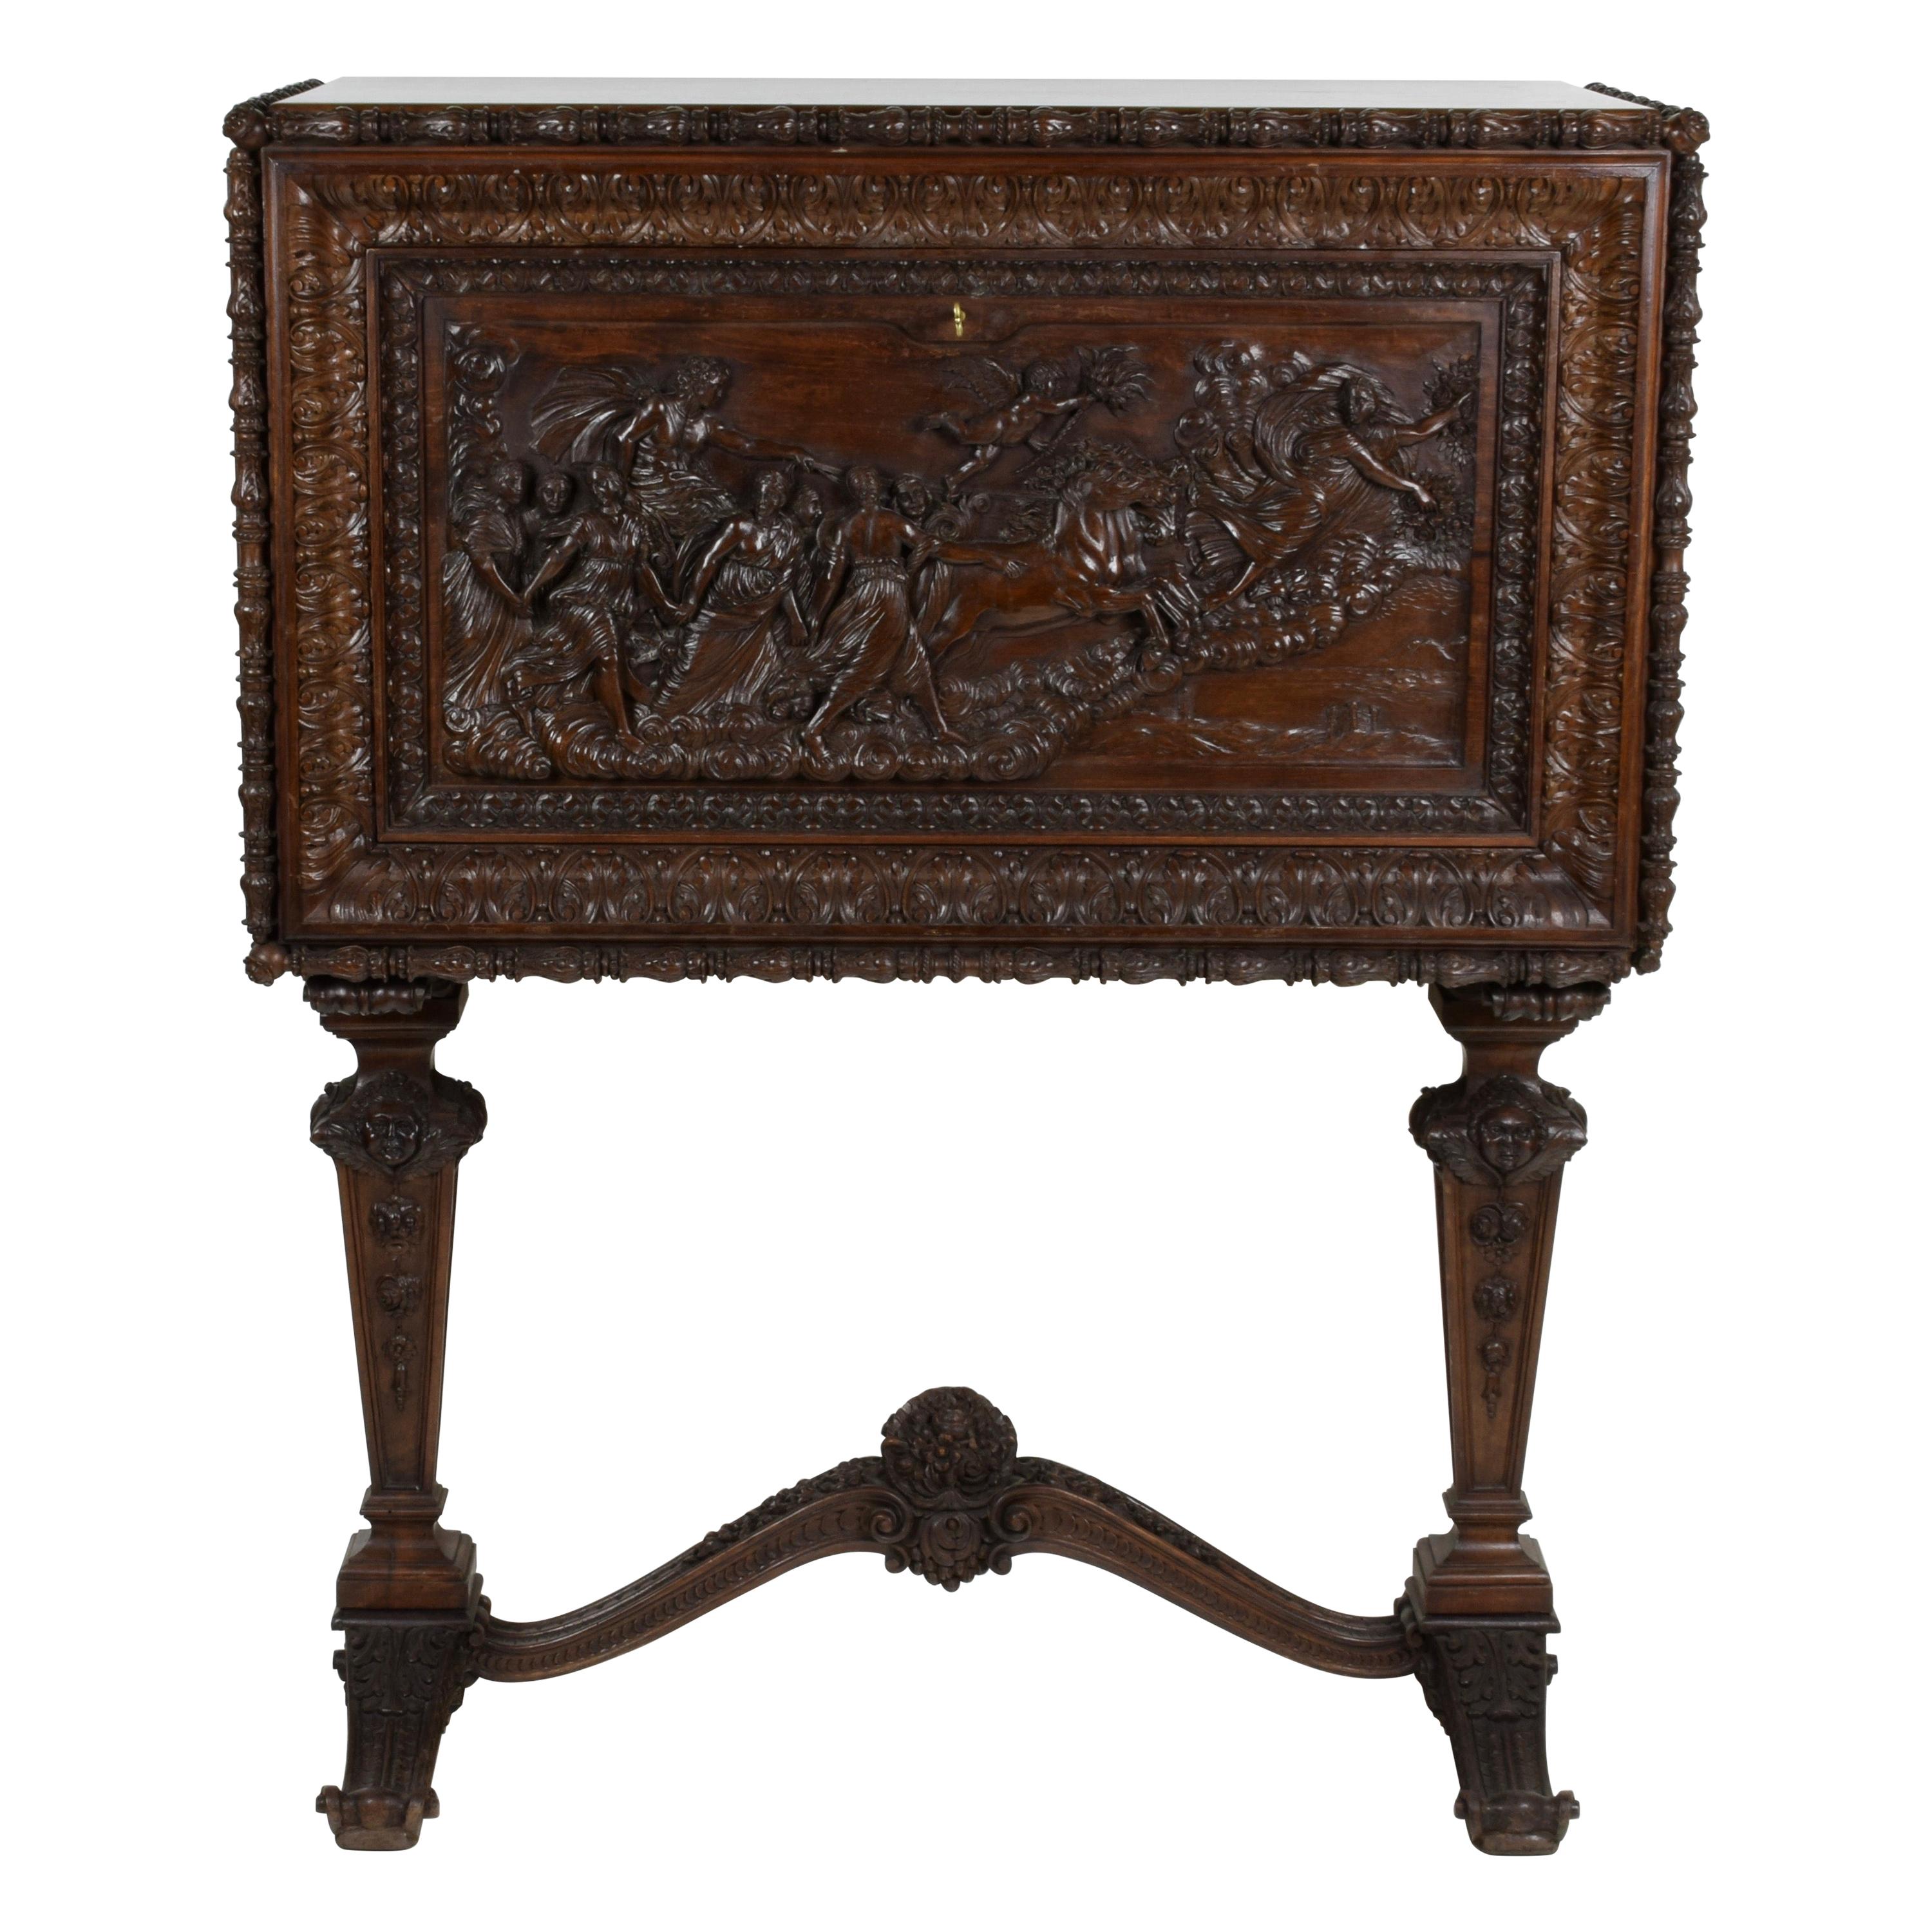 Walnut Dry Bar Cabinet Carved by Hand Depicting the "Aurora" by Guido Reni